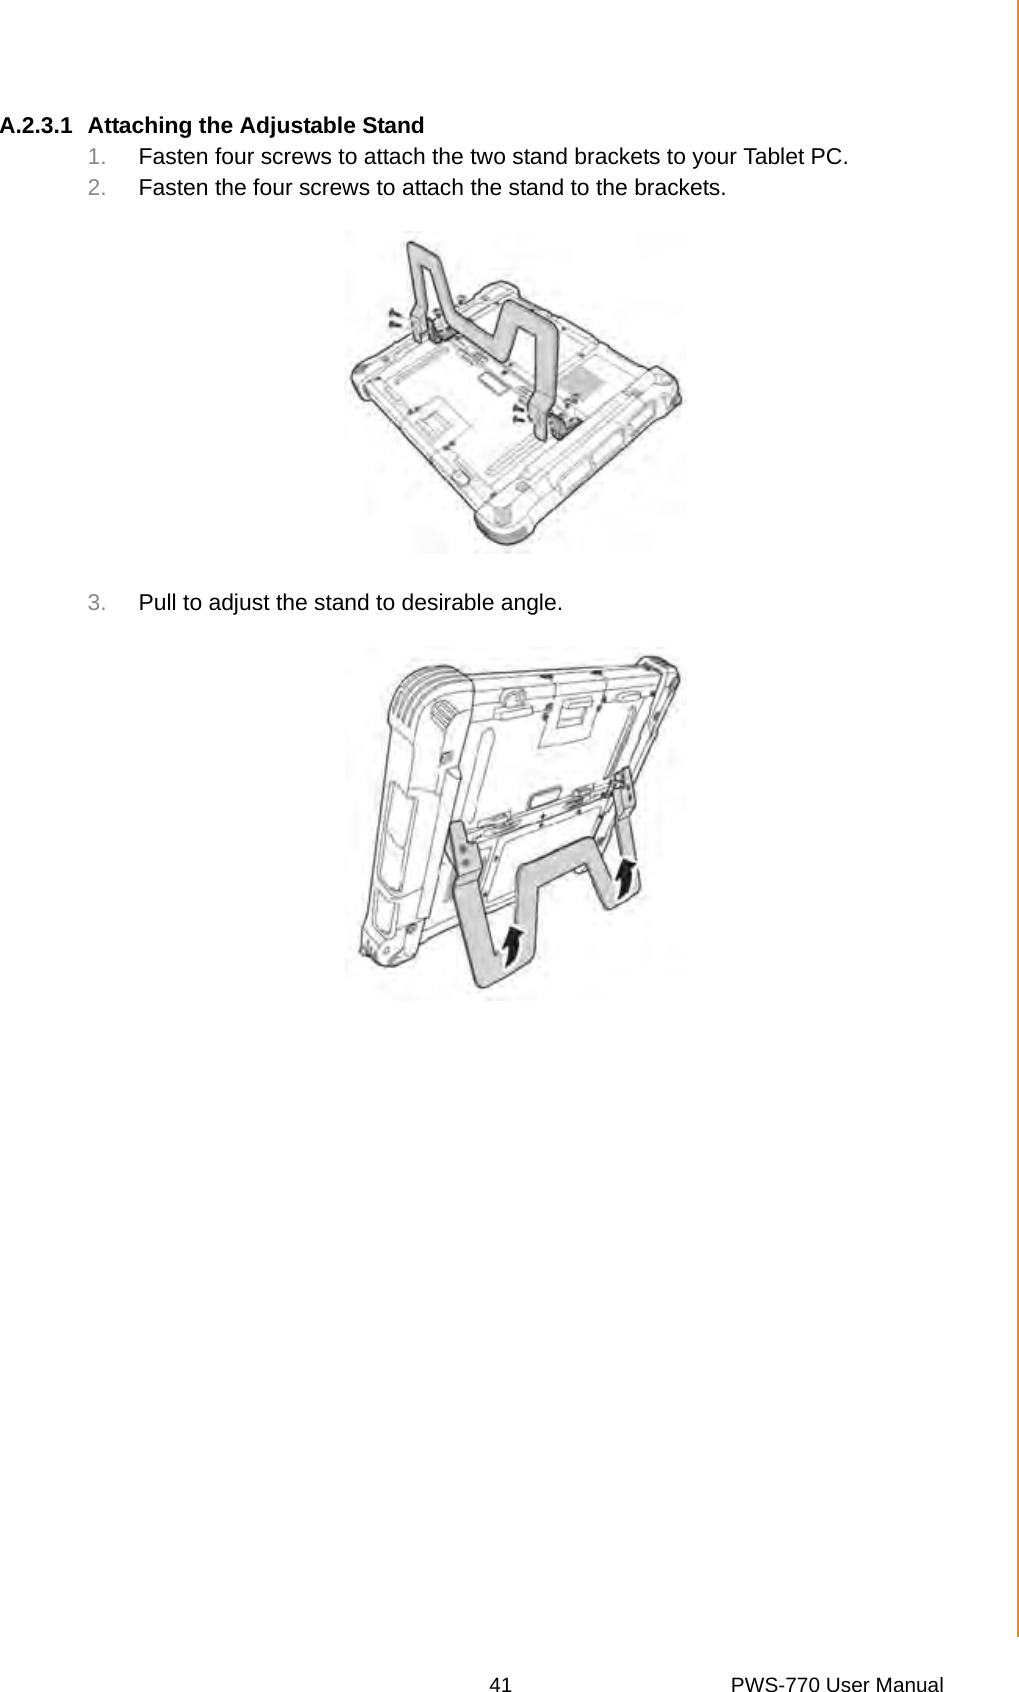 41 PWS-770 User ManualAppendix A SpecificationsA.2.3.1 Attaching the Adjustable Stand1. Fasten four screws to attach the two stand brackets to your Tablet PC.2. Fasten the four screws to attach the stand to the brackets.3. Pull to adjust the stand to desirable angle.